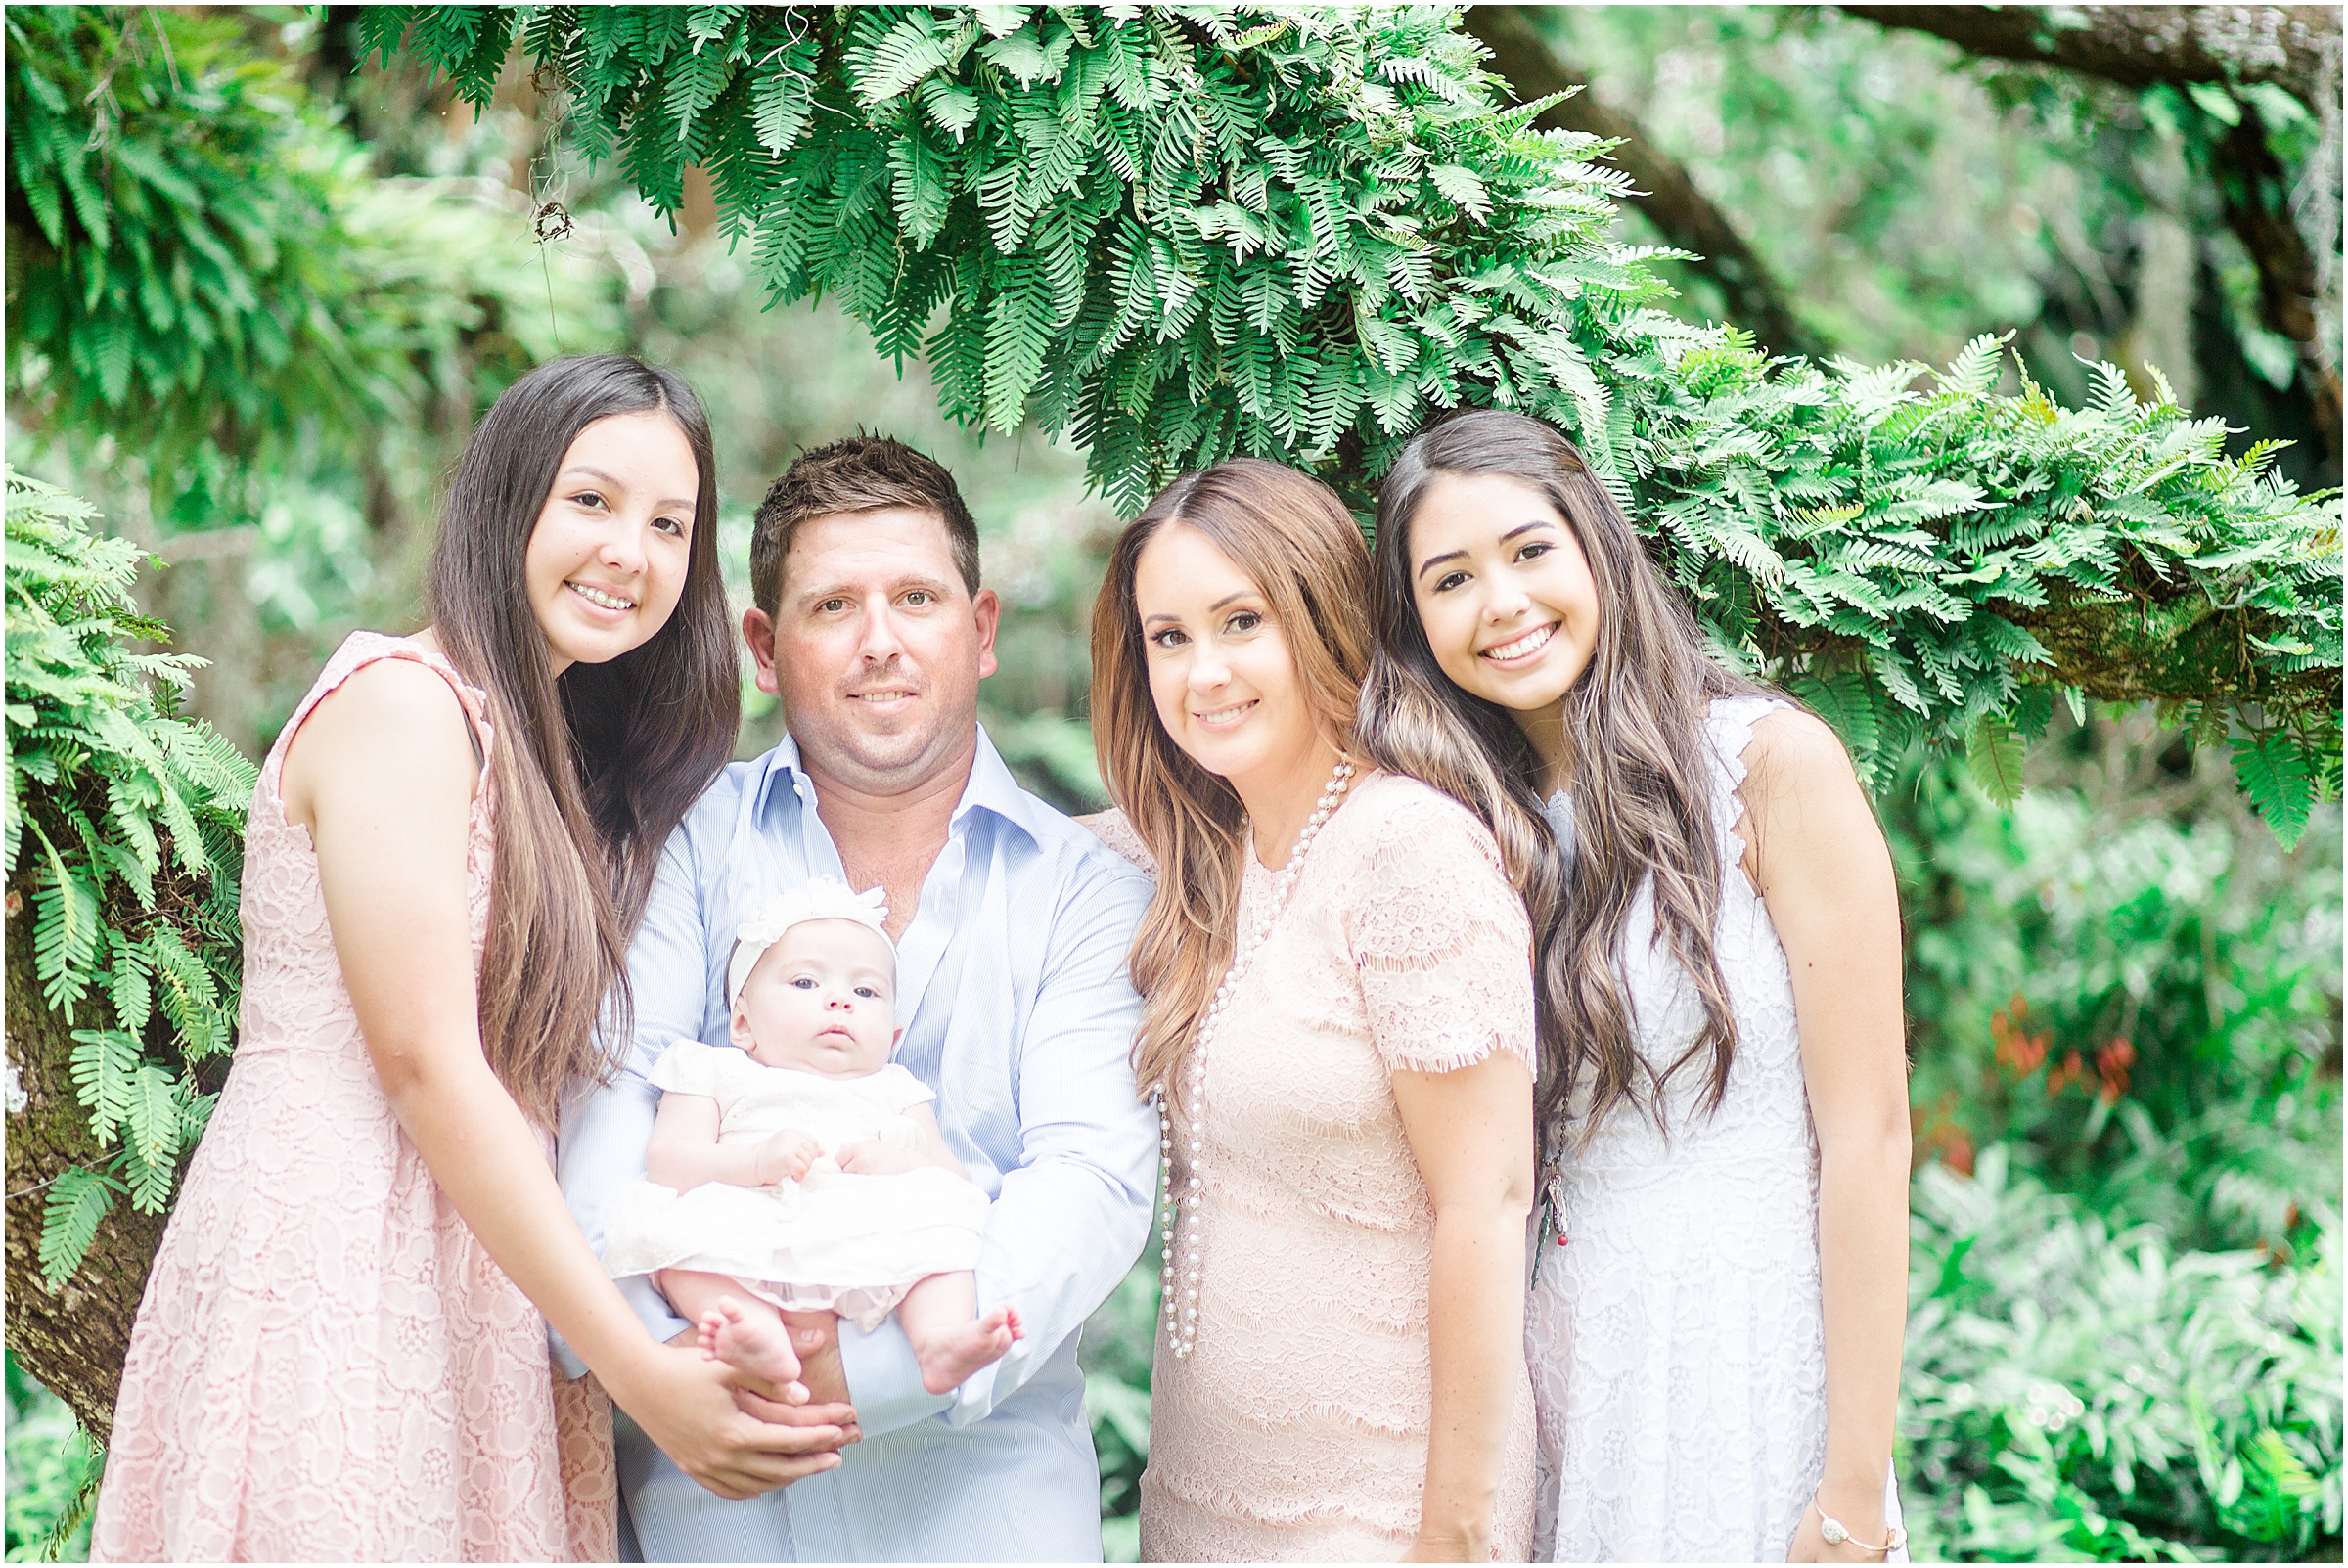 Jessica & Brad, along with their family, take photos at Bok Tower Gardens in Lake Wales, Florida.